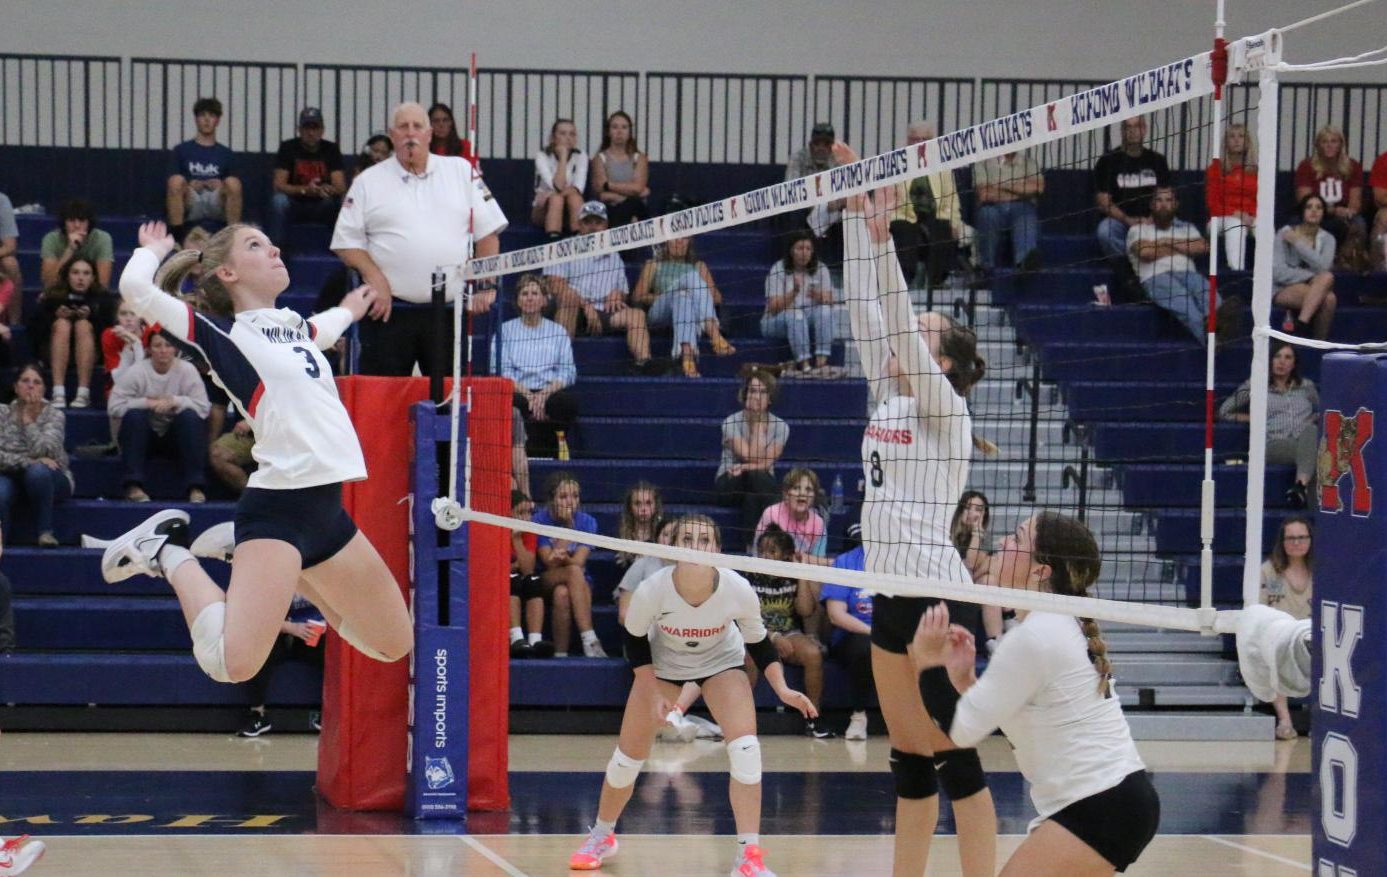 Junior Regan McClain slams the ball over the net in a match against North Miami. The VolleyKats won the match, 3-0.